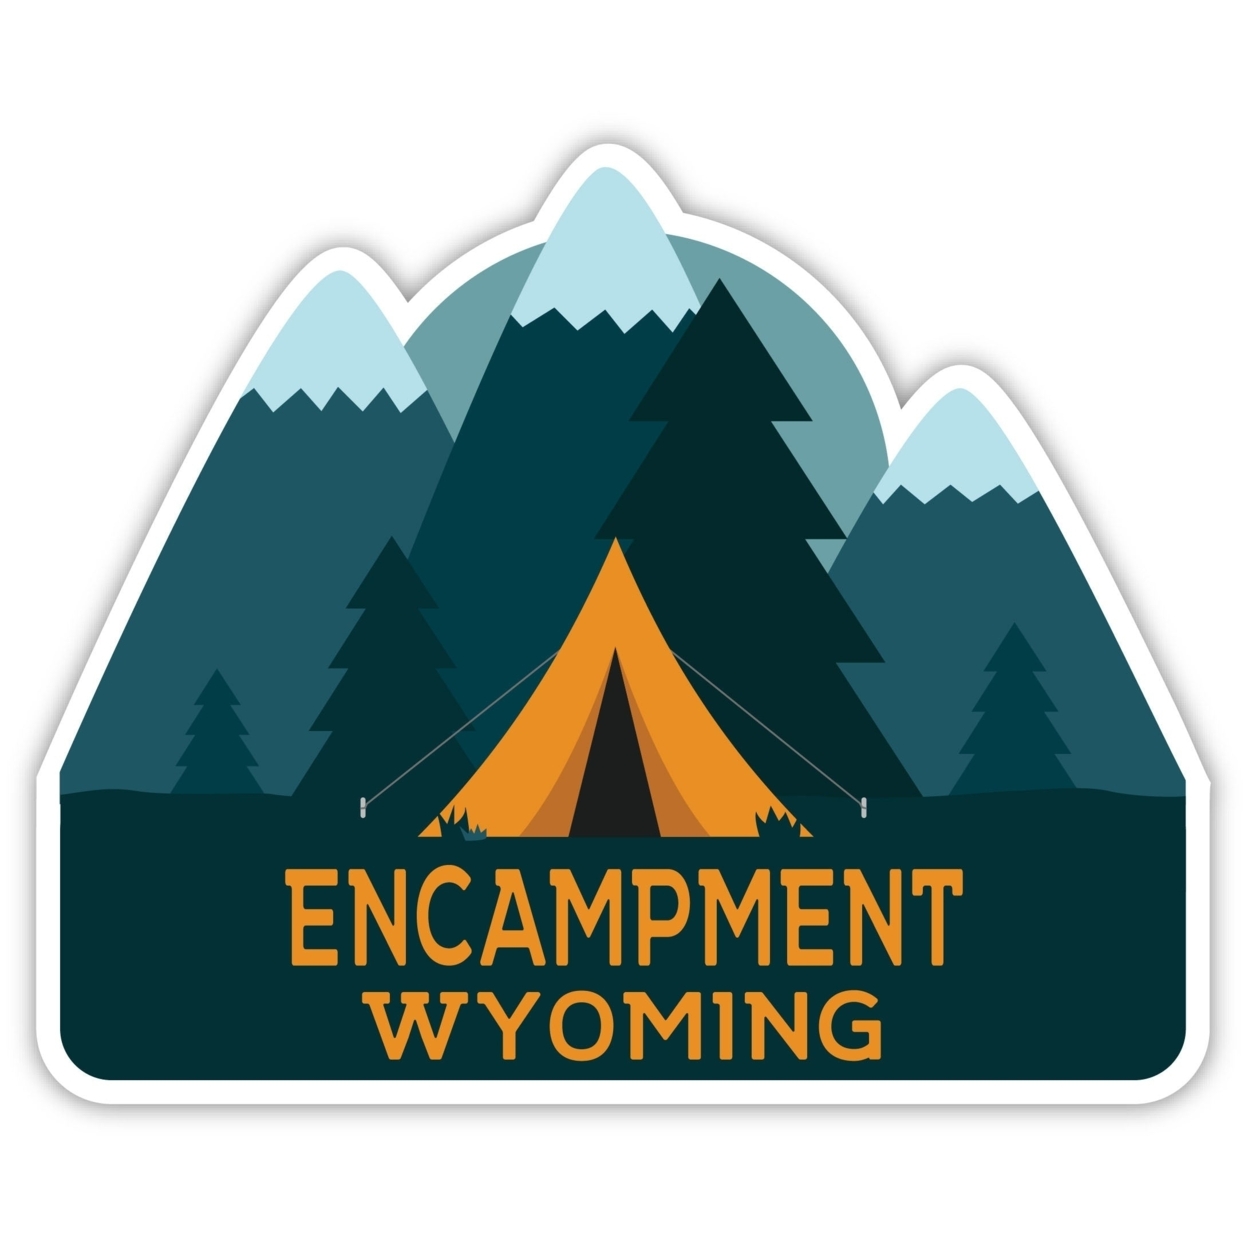 Encampment Wyoming Souvenir Decorative Stickers (Choose Theme And Size) - 4-Pack, 12-Inch, Tent